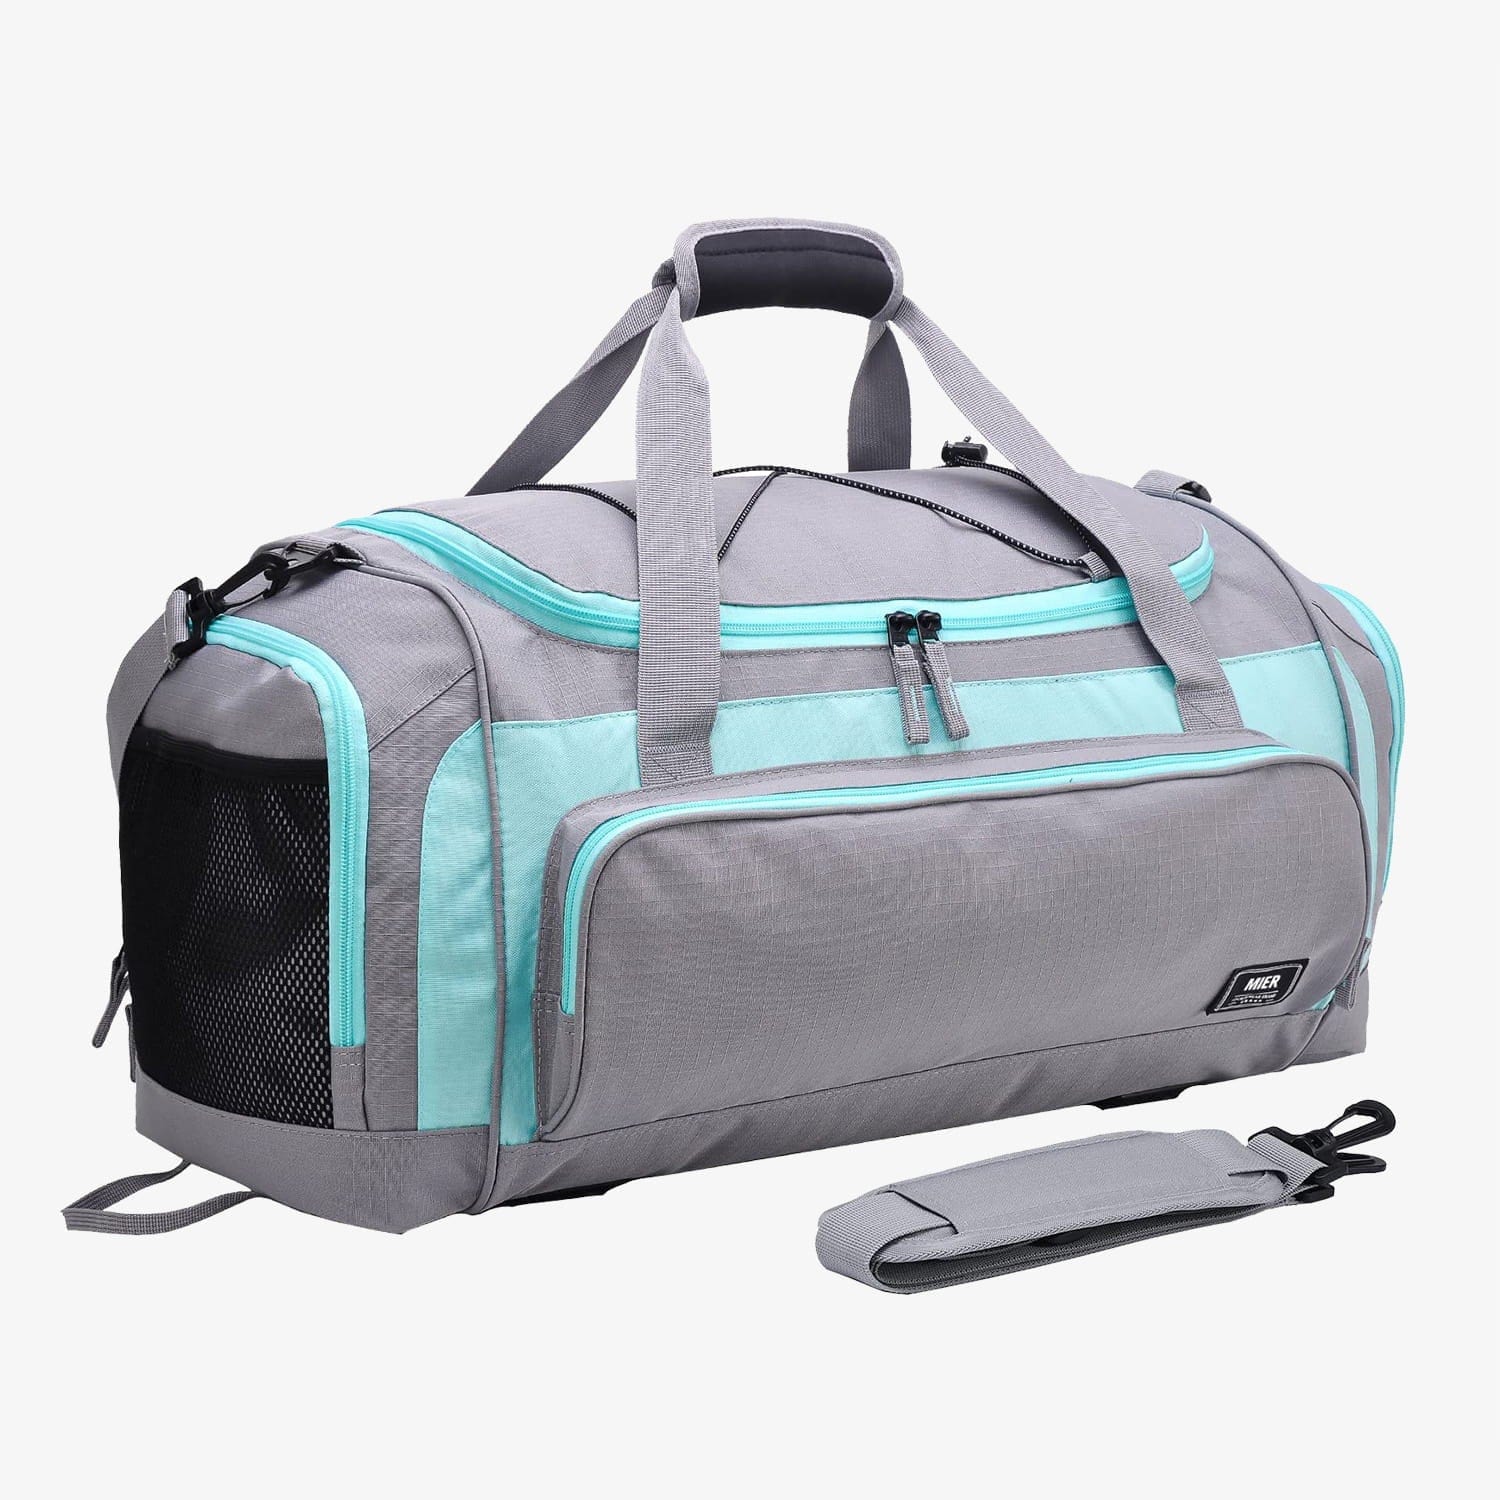 Large Sports Gym Bag Duffel Bag with Shoe Compartment Gym Duffel Bag Grey Green MIER